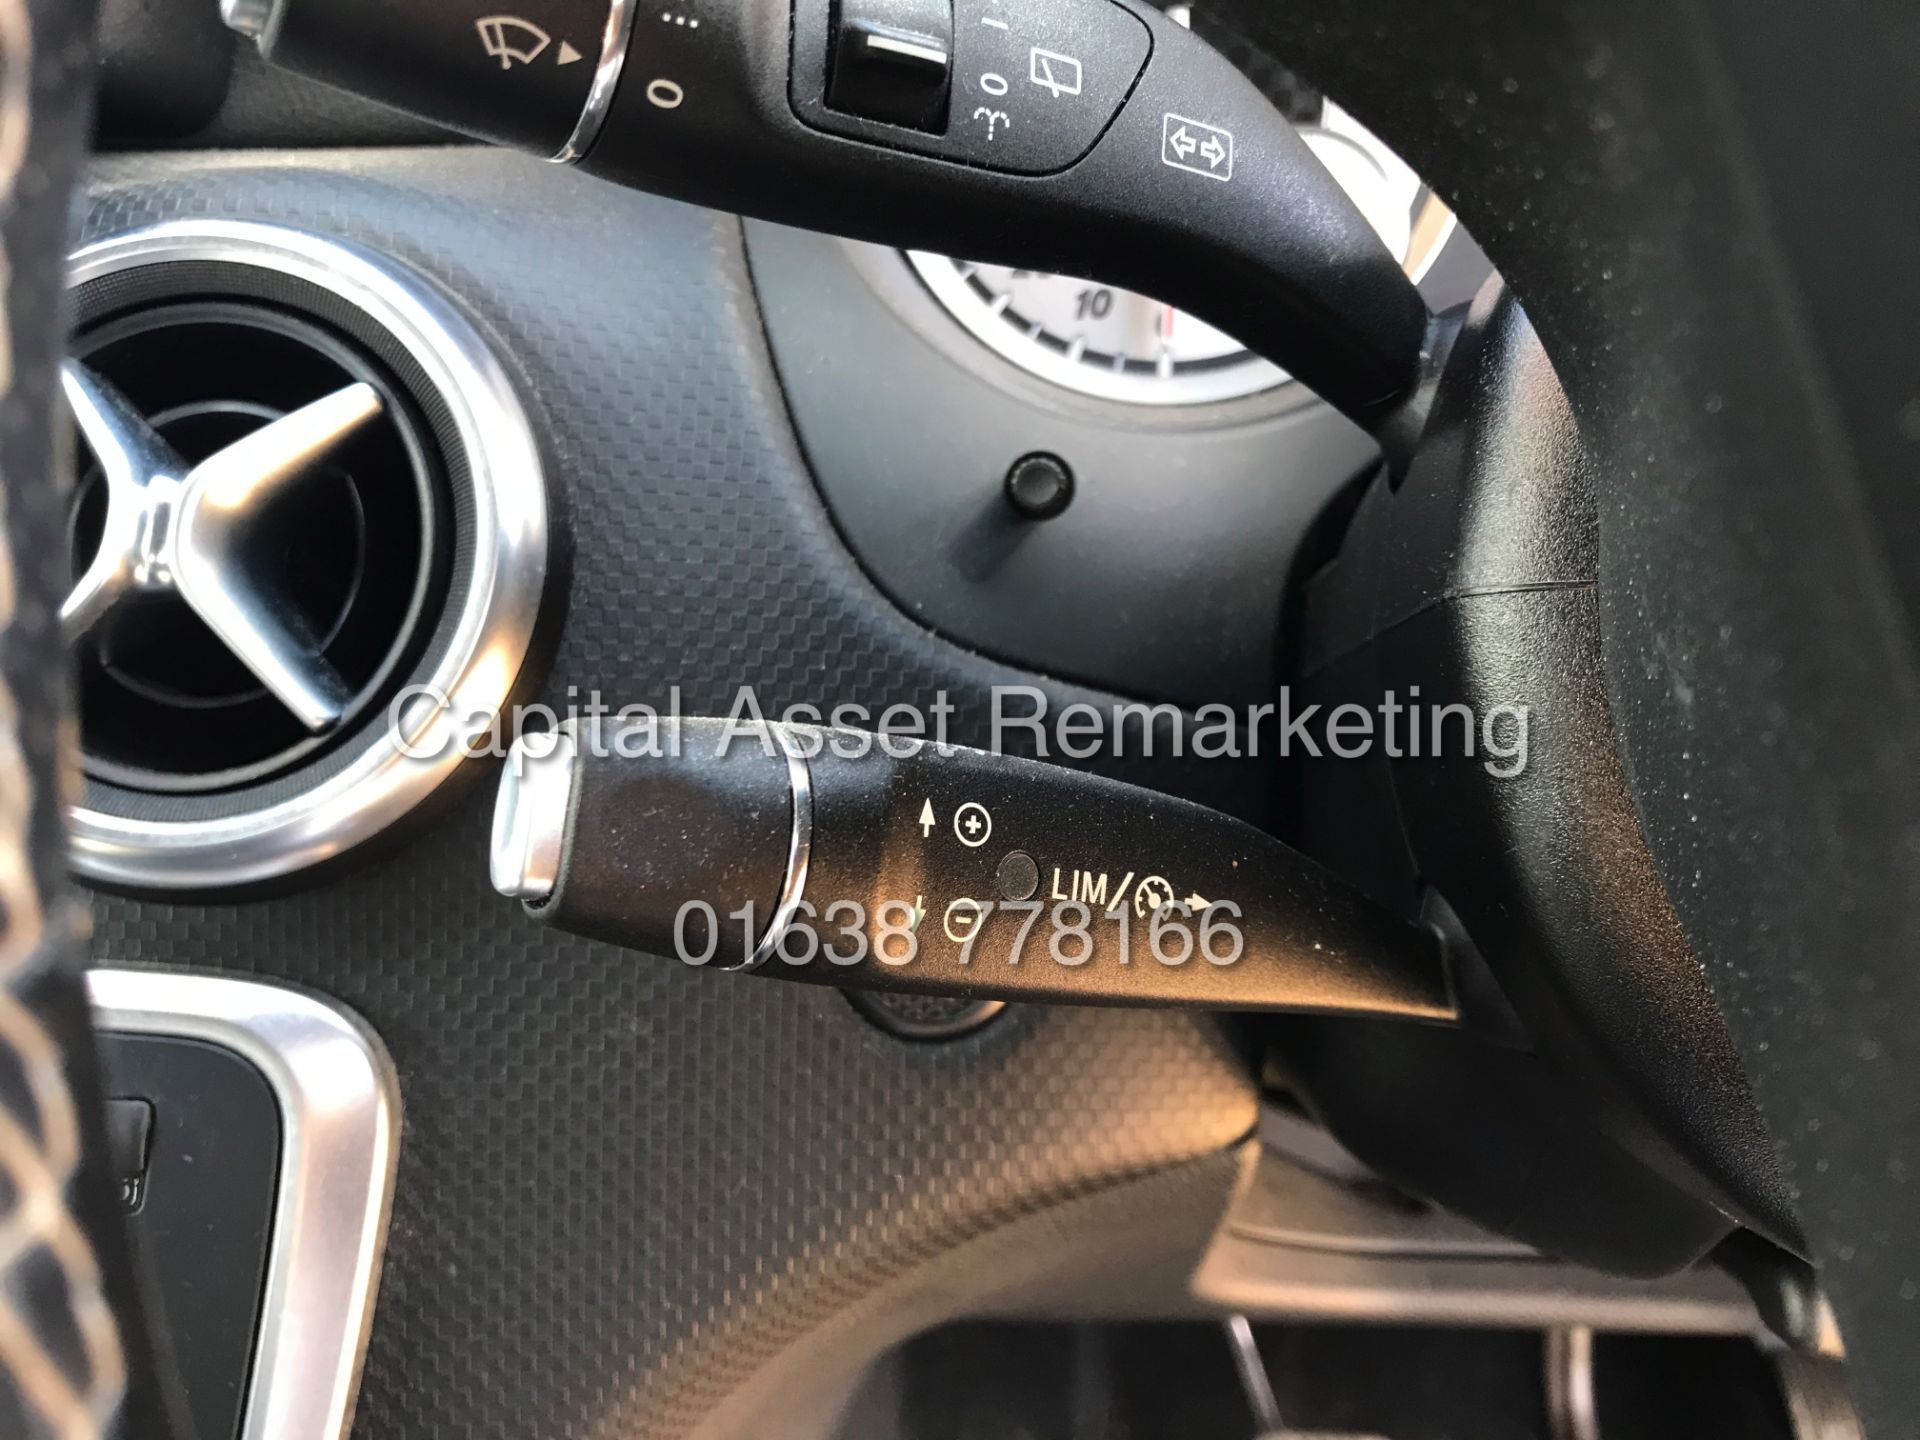 (ON SALE) MERCEDES A180d "SPORT" (15 REG) ONLY 1 OWNER FSH - SAT NAV - LEATHER - AIR CON - CRUISE - Image 15 of 21